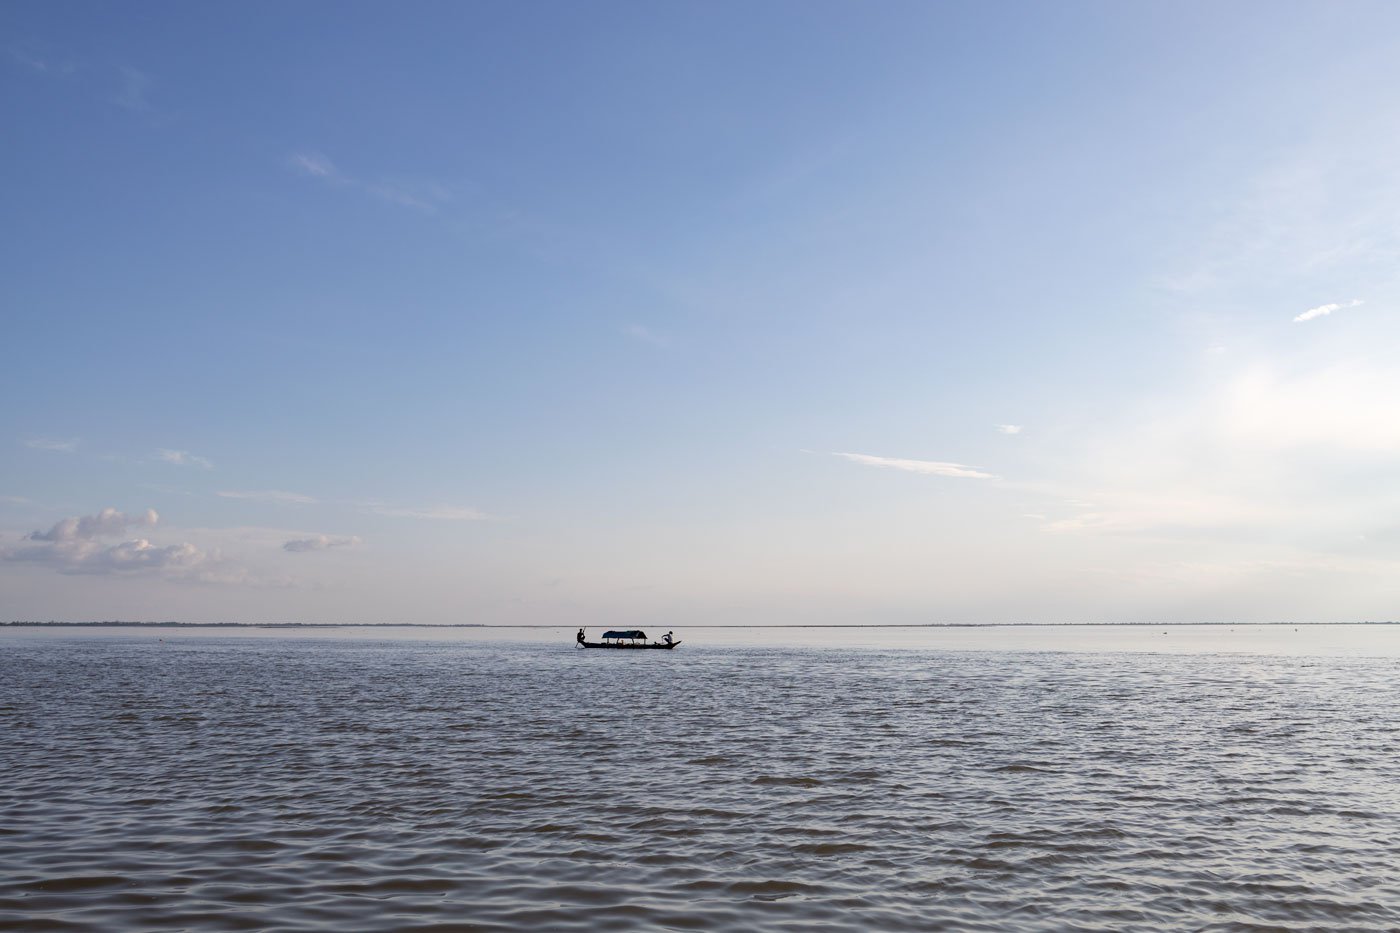 The Brahmaputra riverine system, one of the largest in the world, has a catchment area of 194,413 square kilometres in India